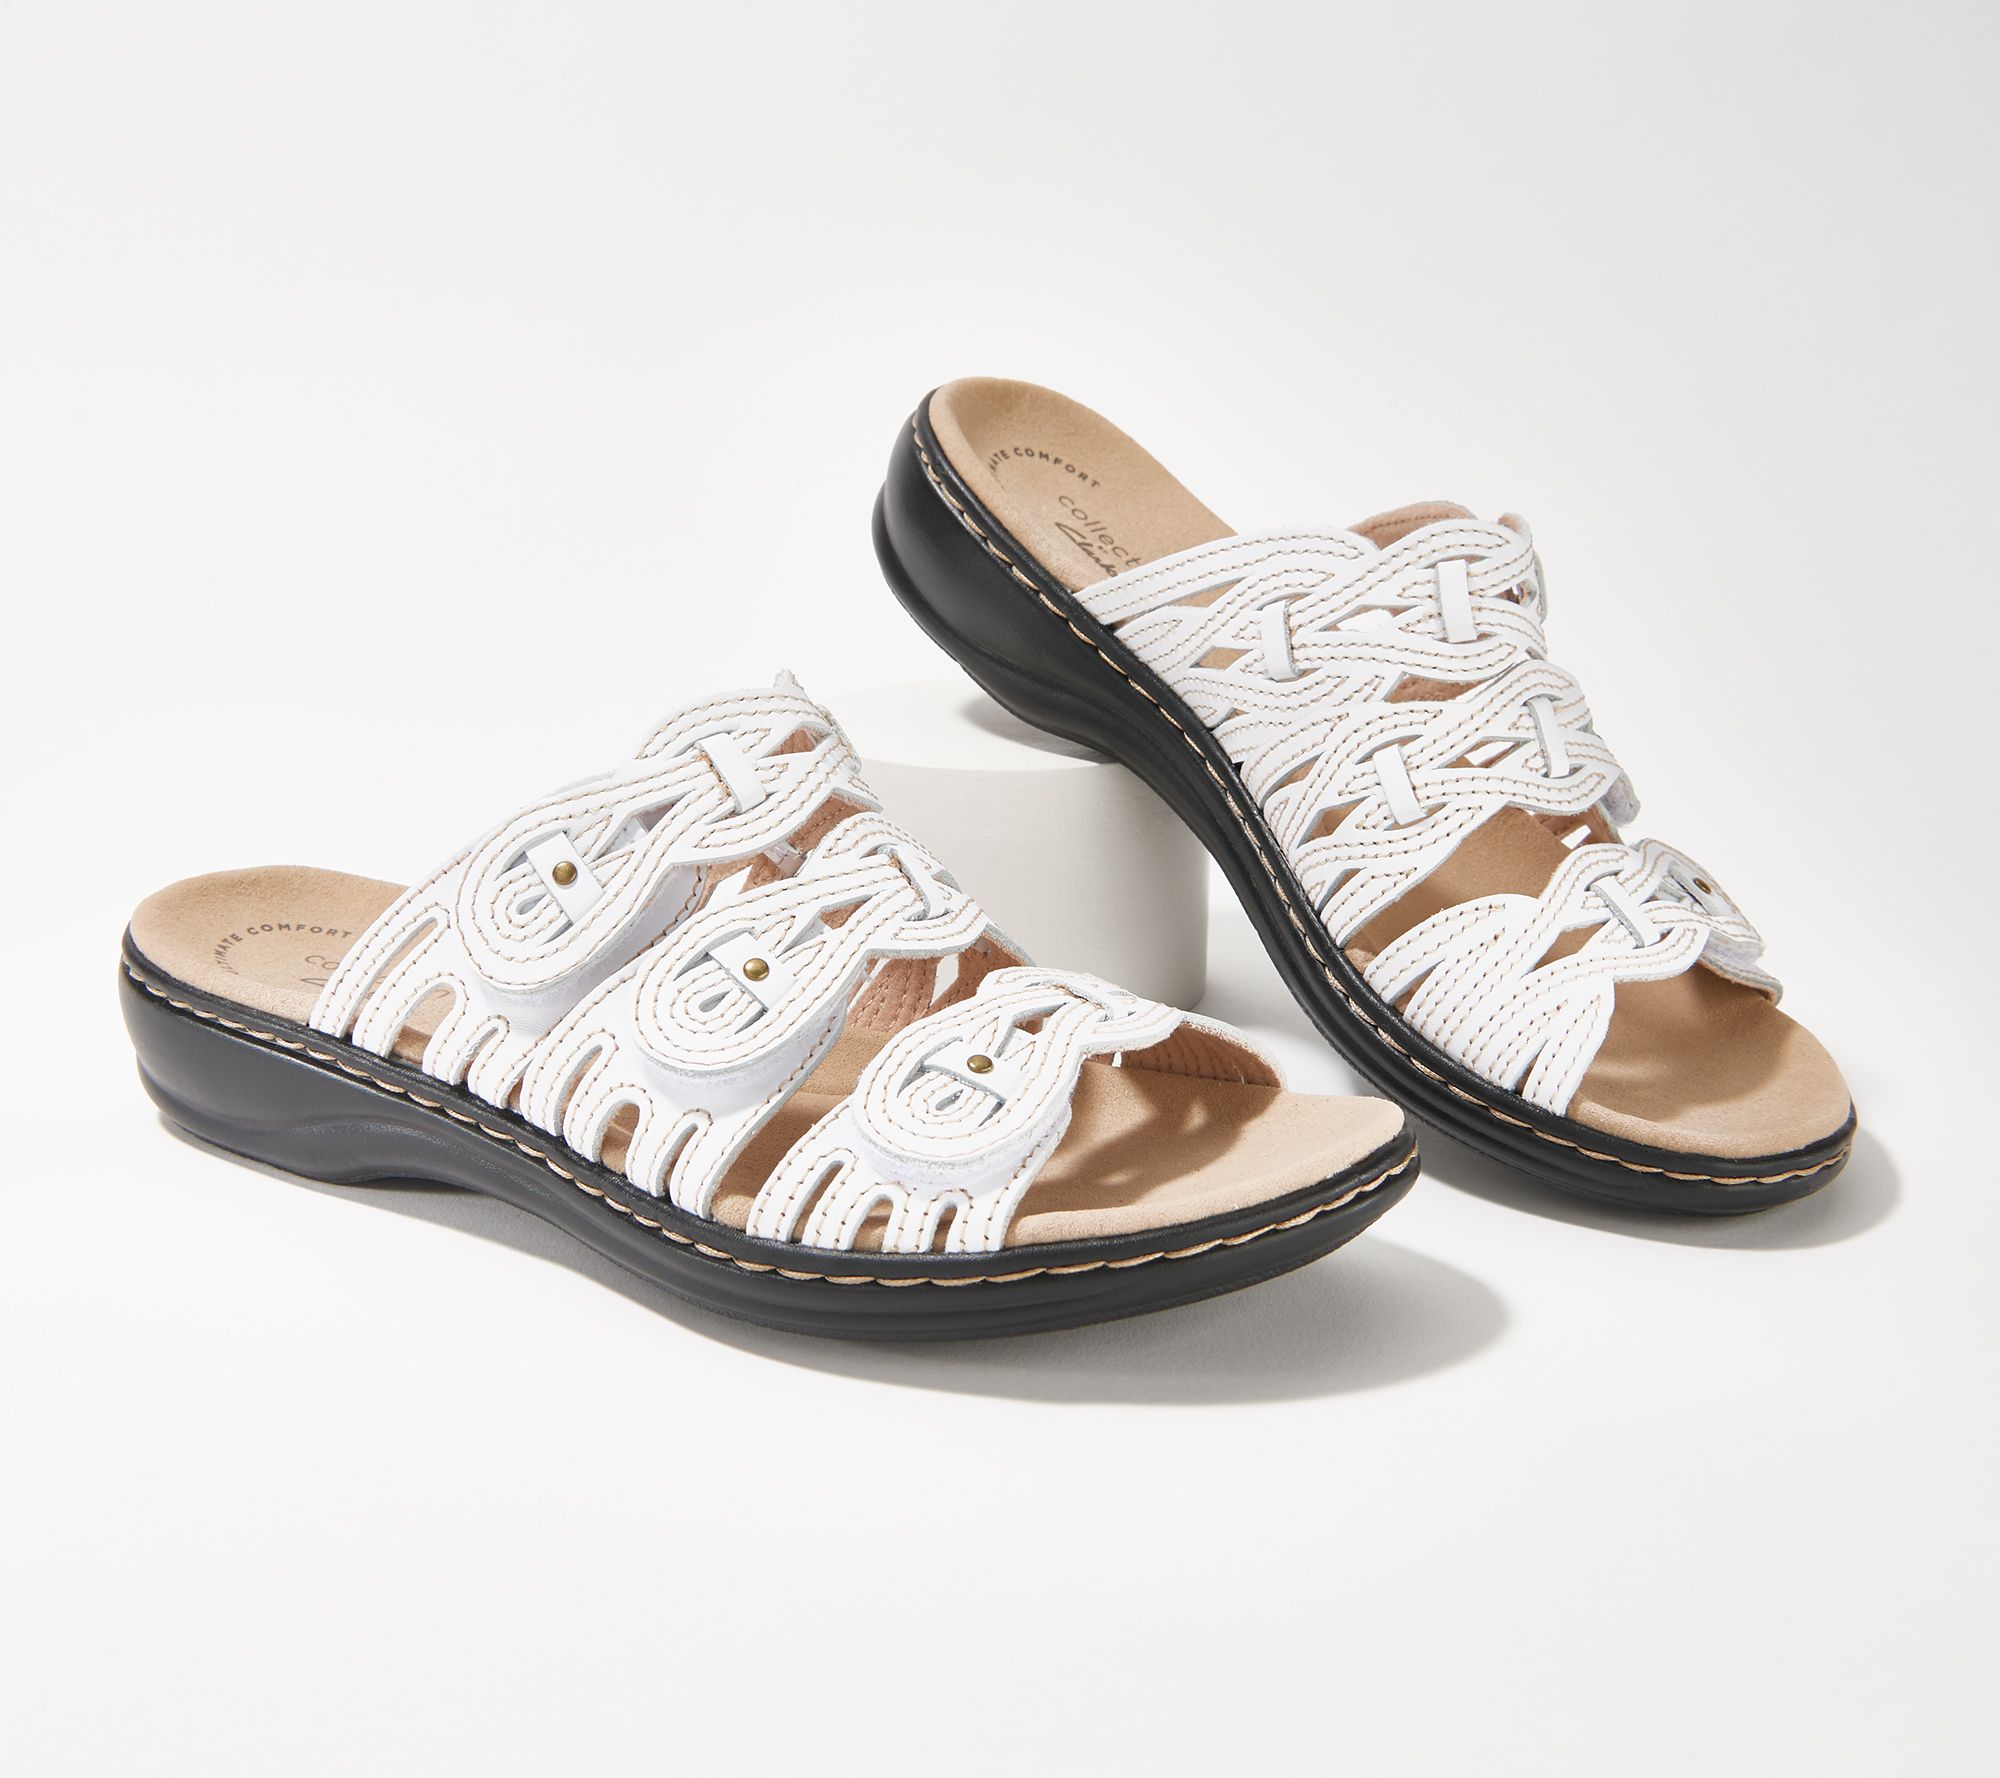 Clarks Collection Adjustable Leather Sandals - Leisa Faye - QVC.com